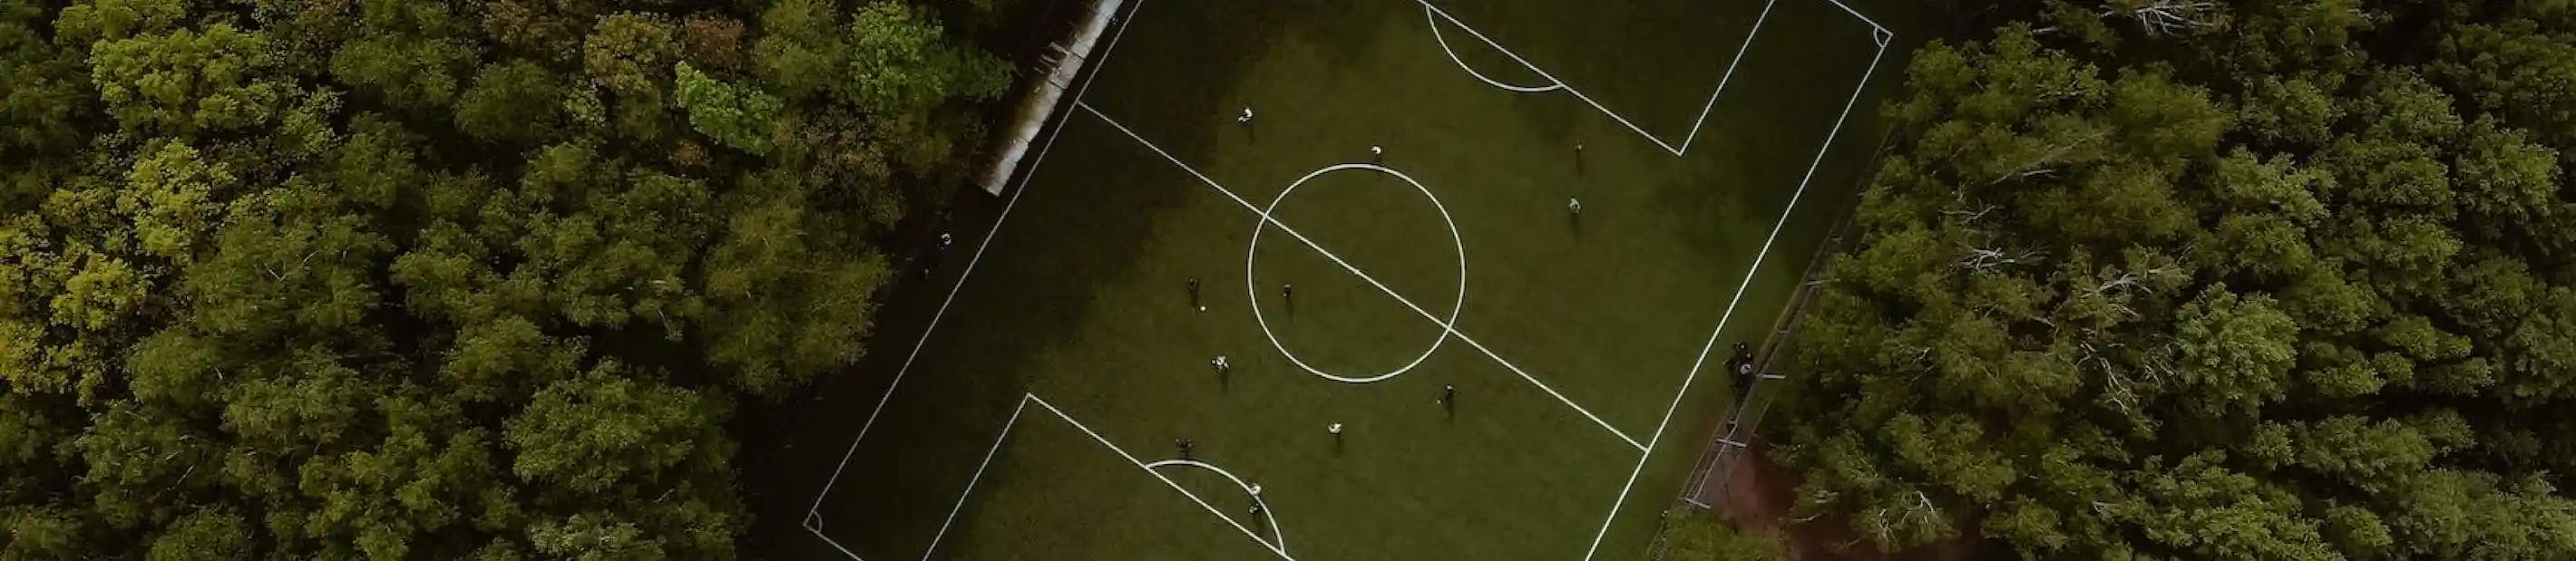 Football pitch with players